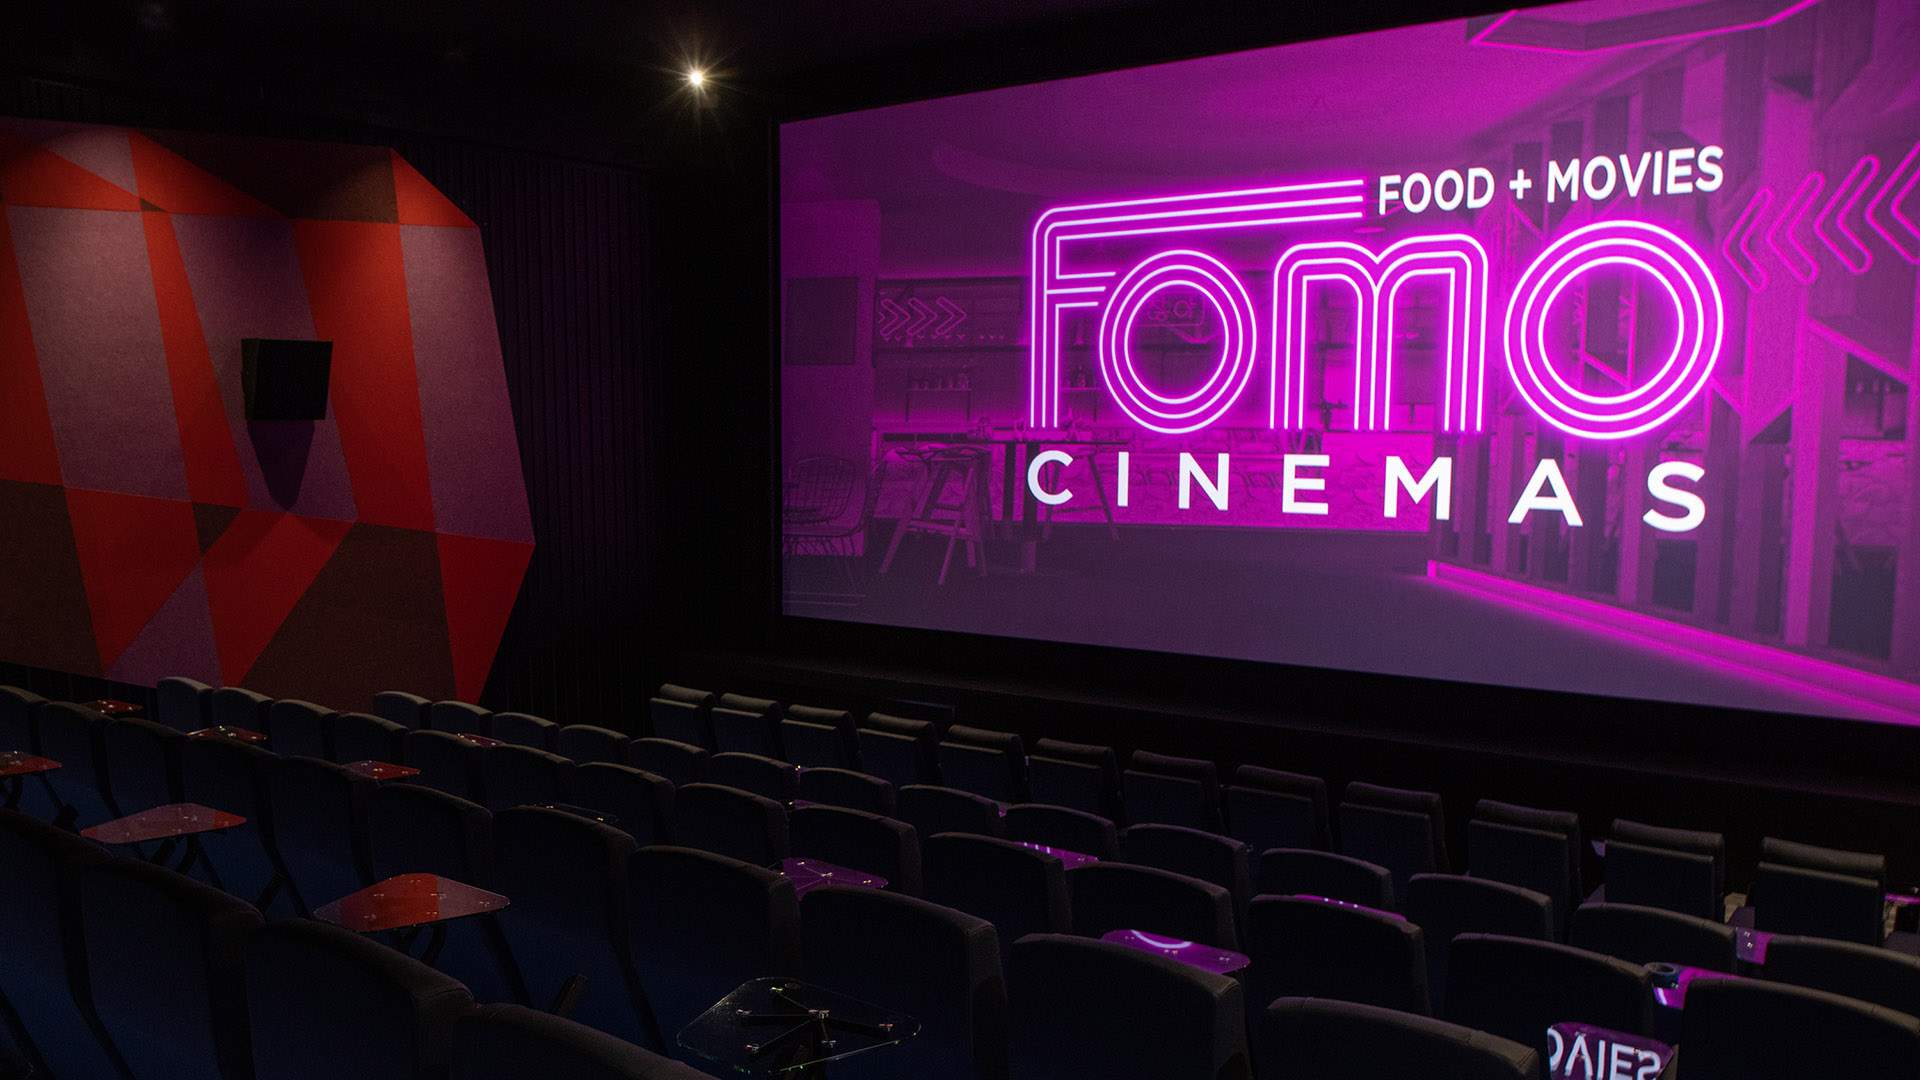 $8 Tickets for Eight Days at FoMo Cinemas